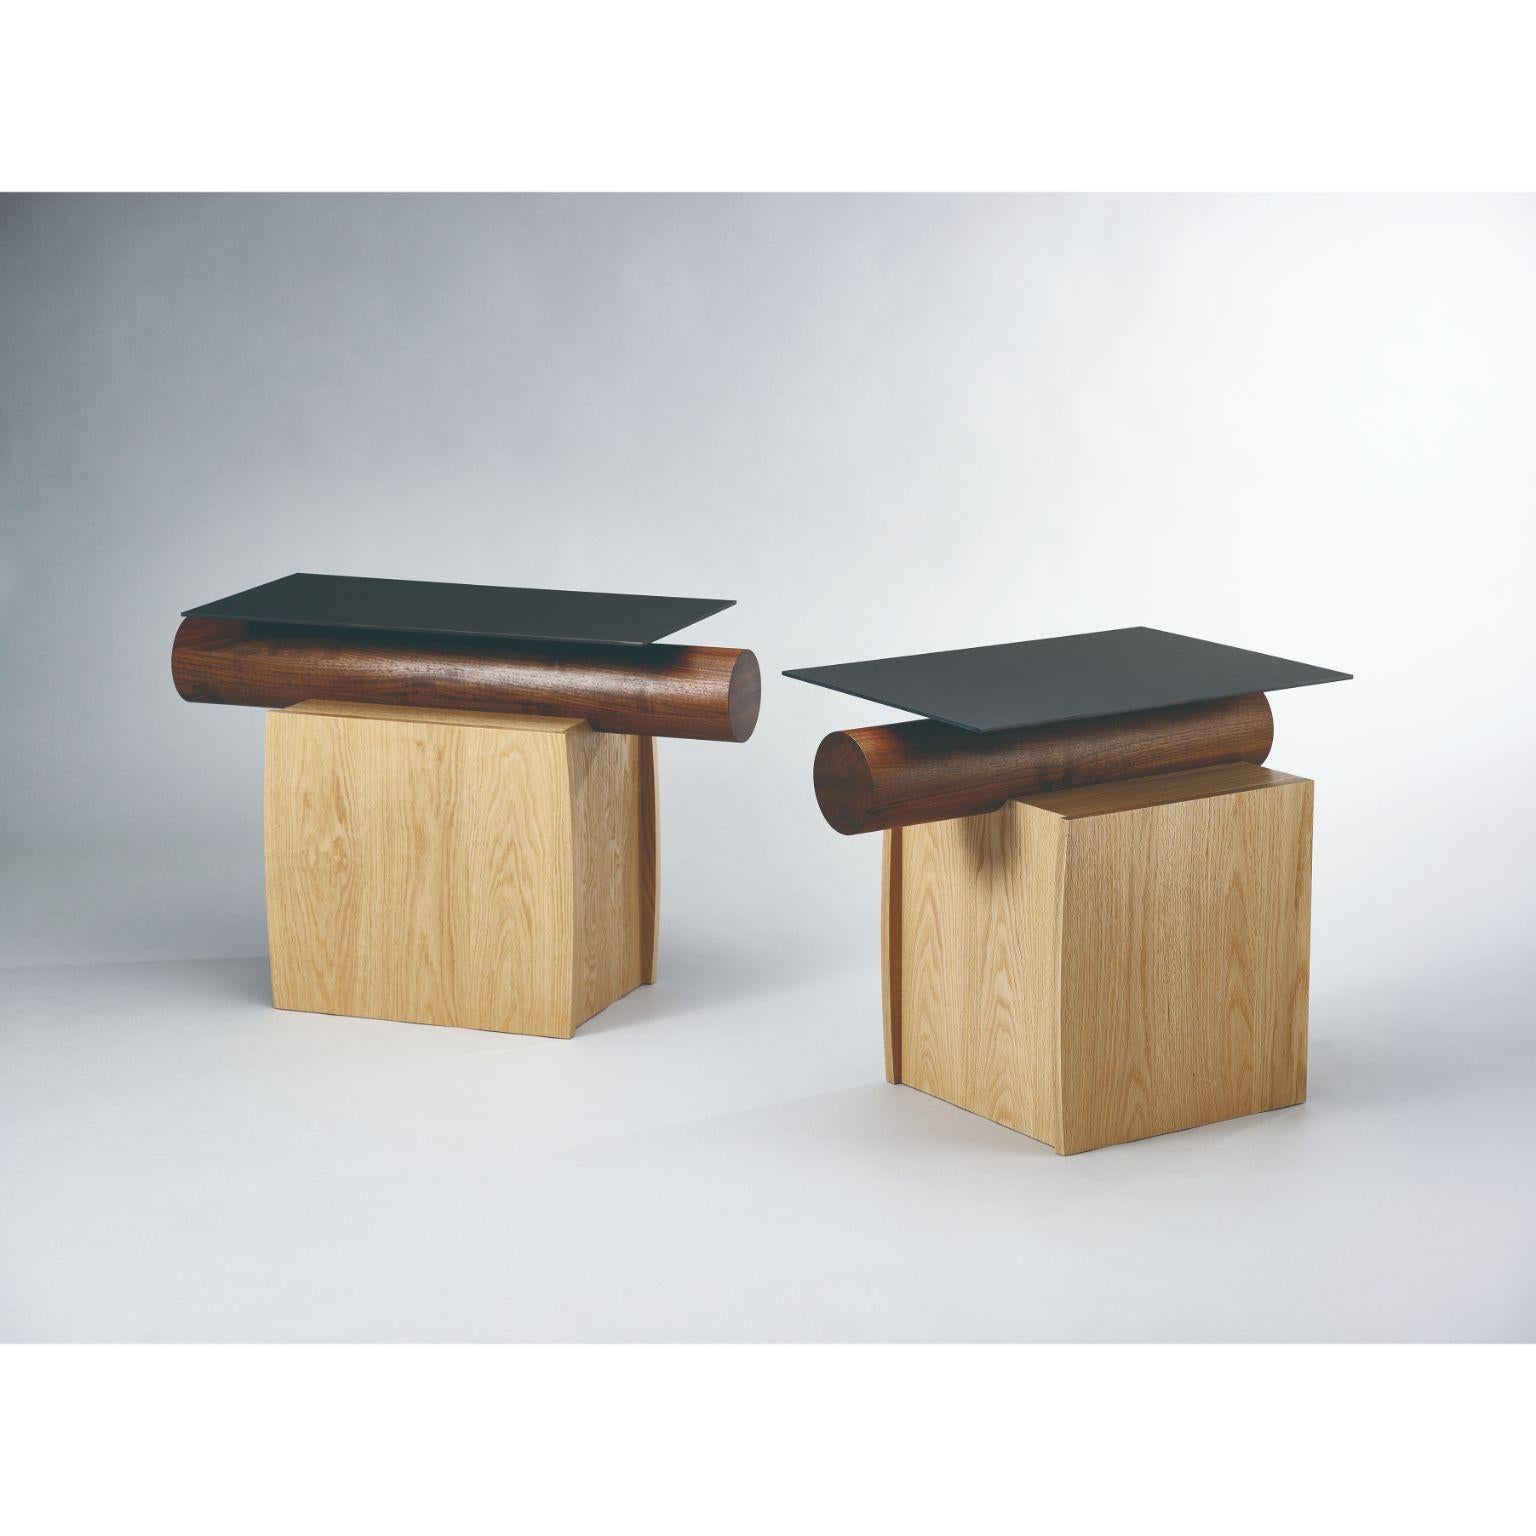 Set of 2 heritage side tables by Lee Jung Hoon
Dimensions: D80 x W33 x H52.4 cm
Materials: Red Oak, Walnut, Stainless steel, Corrosion

The Heritage series, created by designer Lee Jung-hoon is a collection of sculptural modern furniture. The